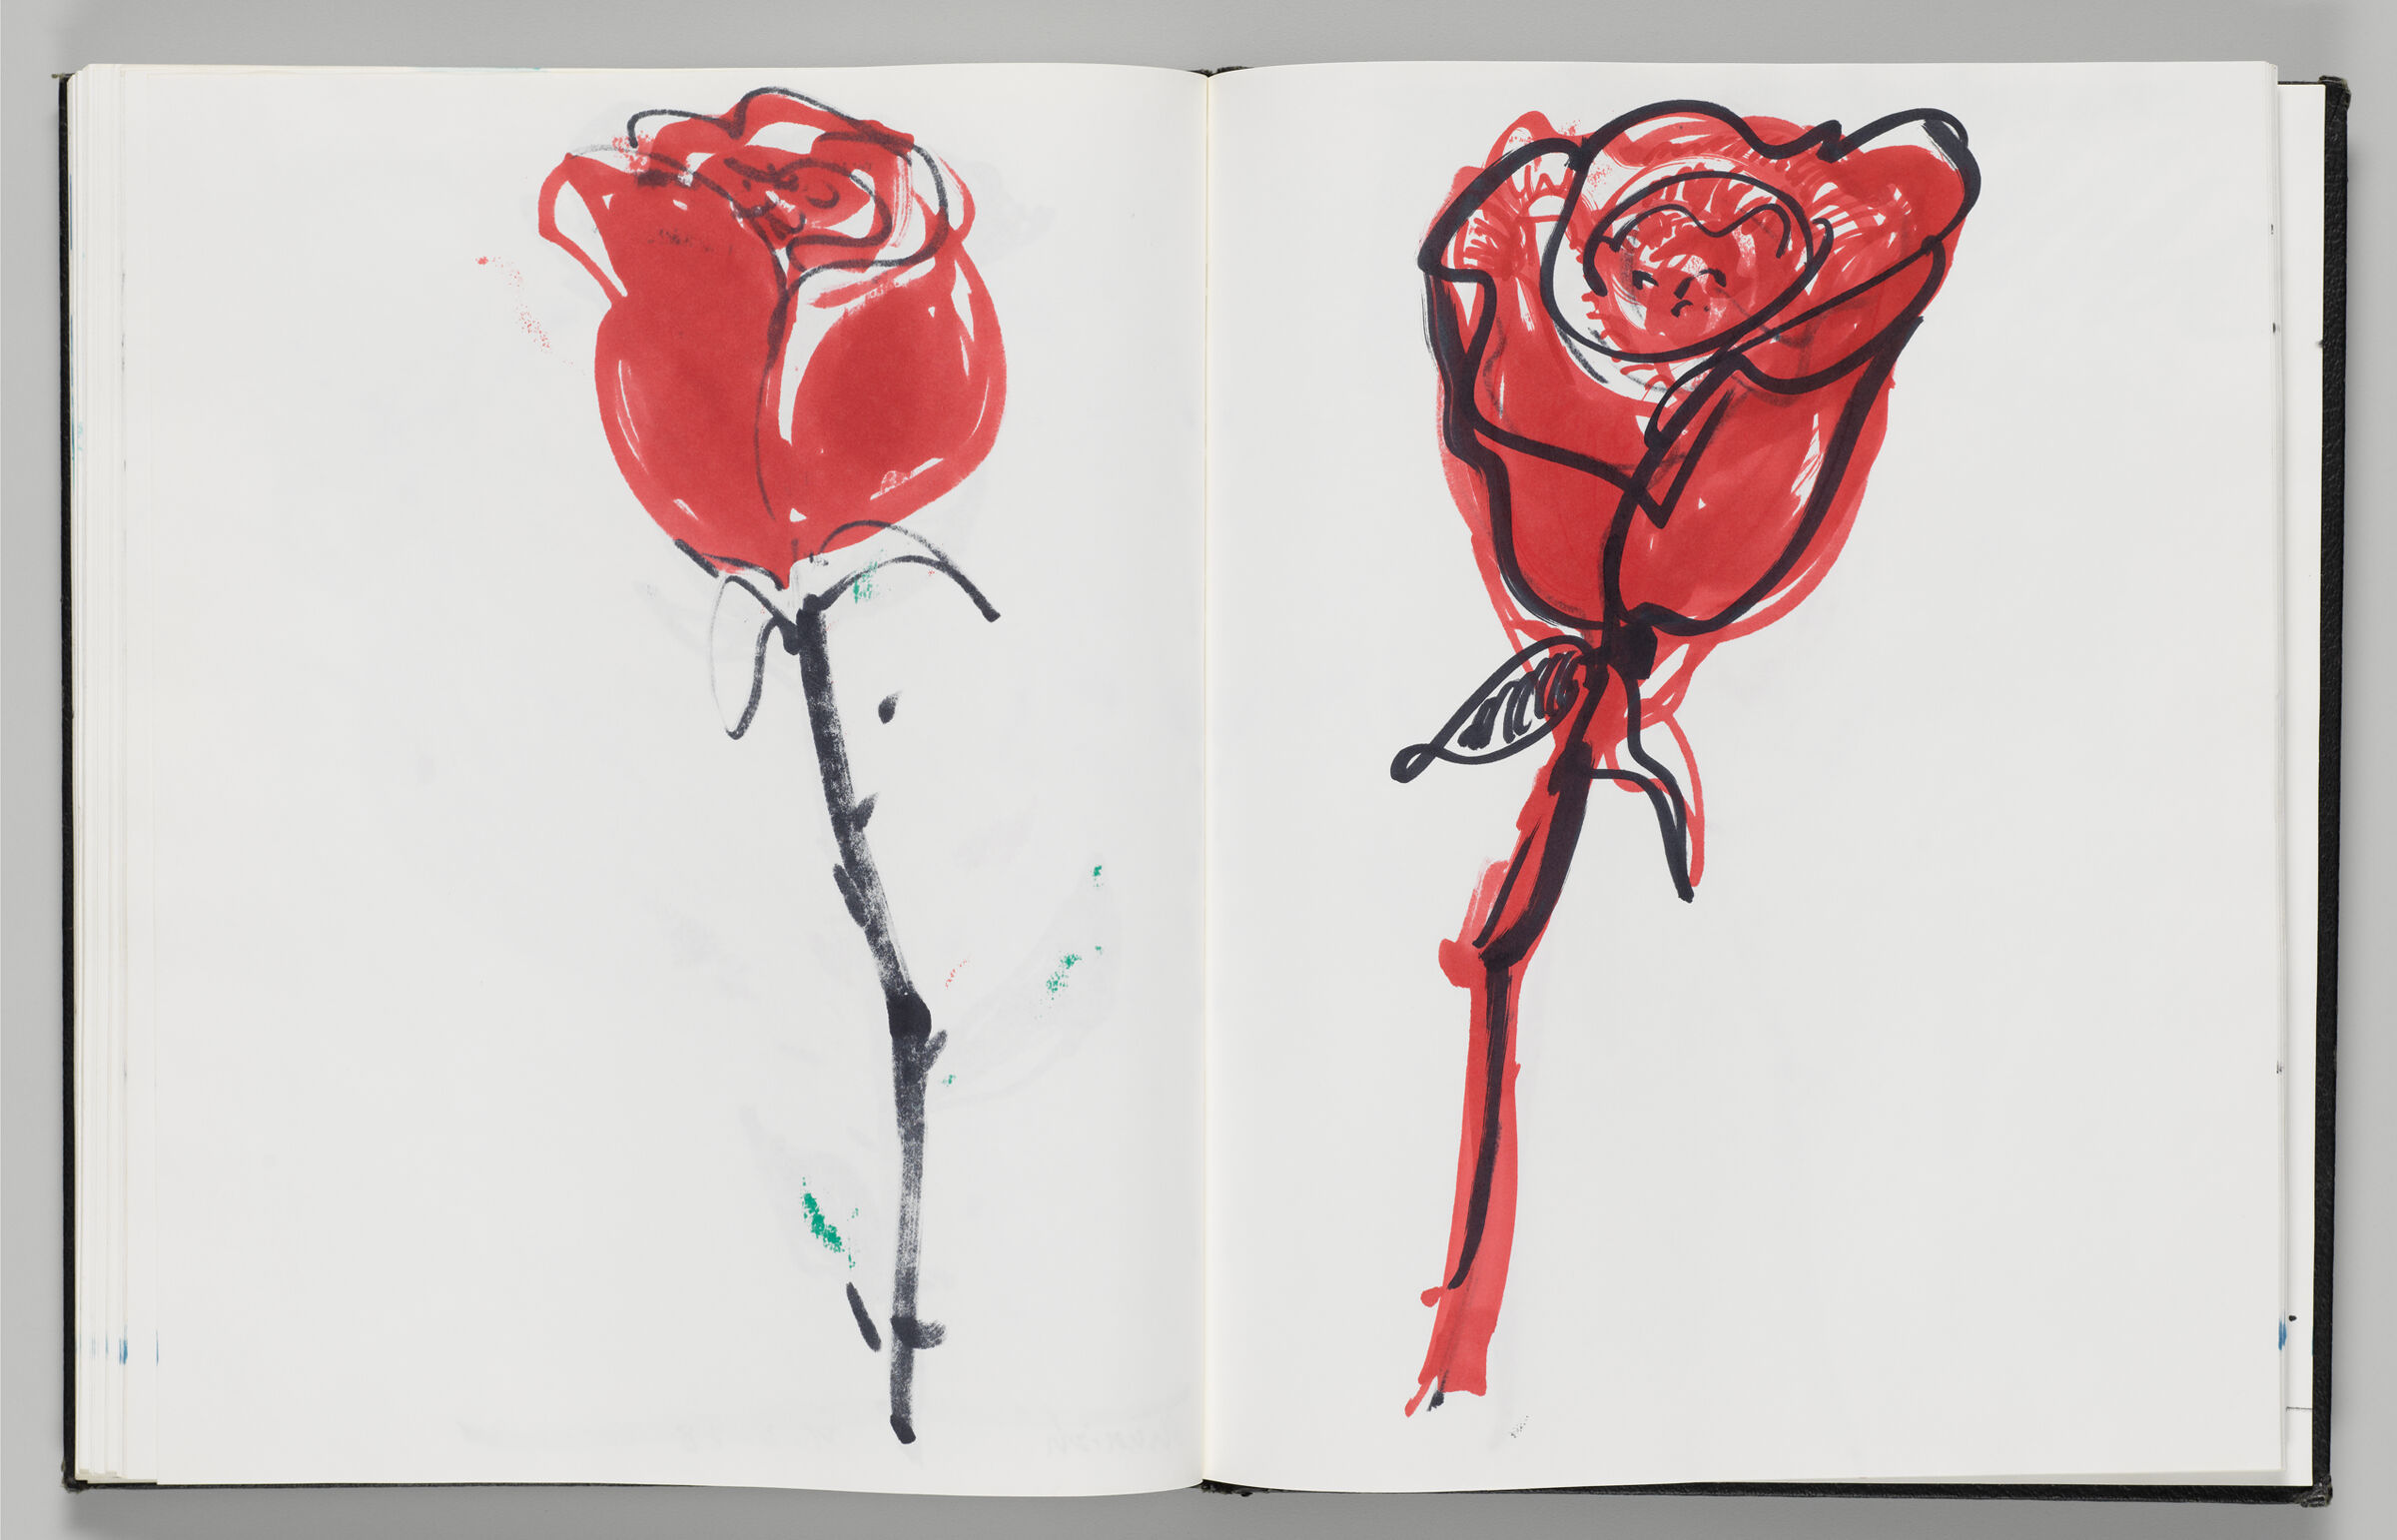 Untitled (Bleed-Through Of Previous Page, Left Page); Untitled (Red Rose, Right Page)